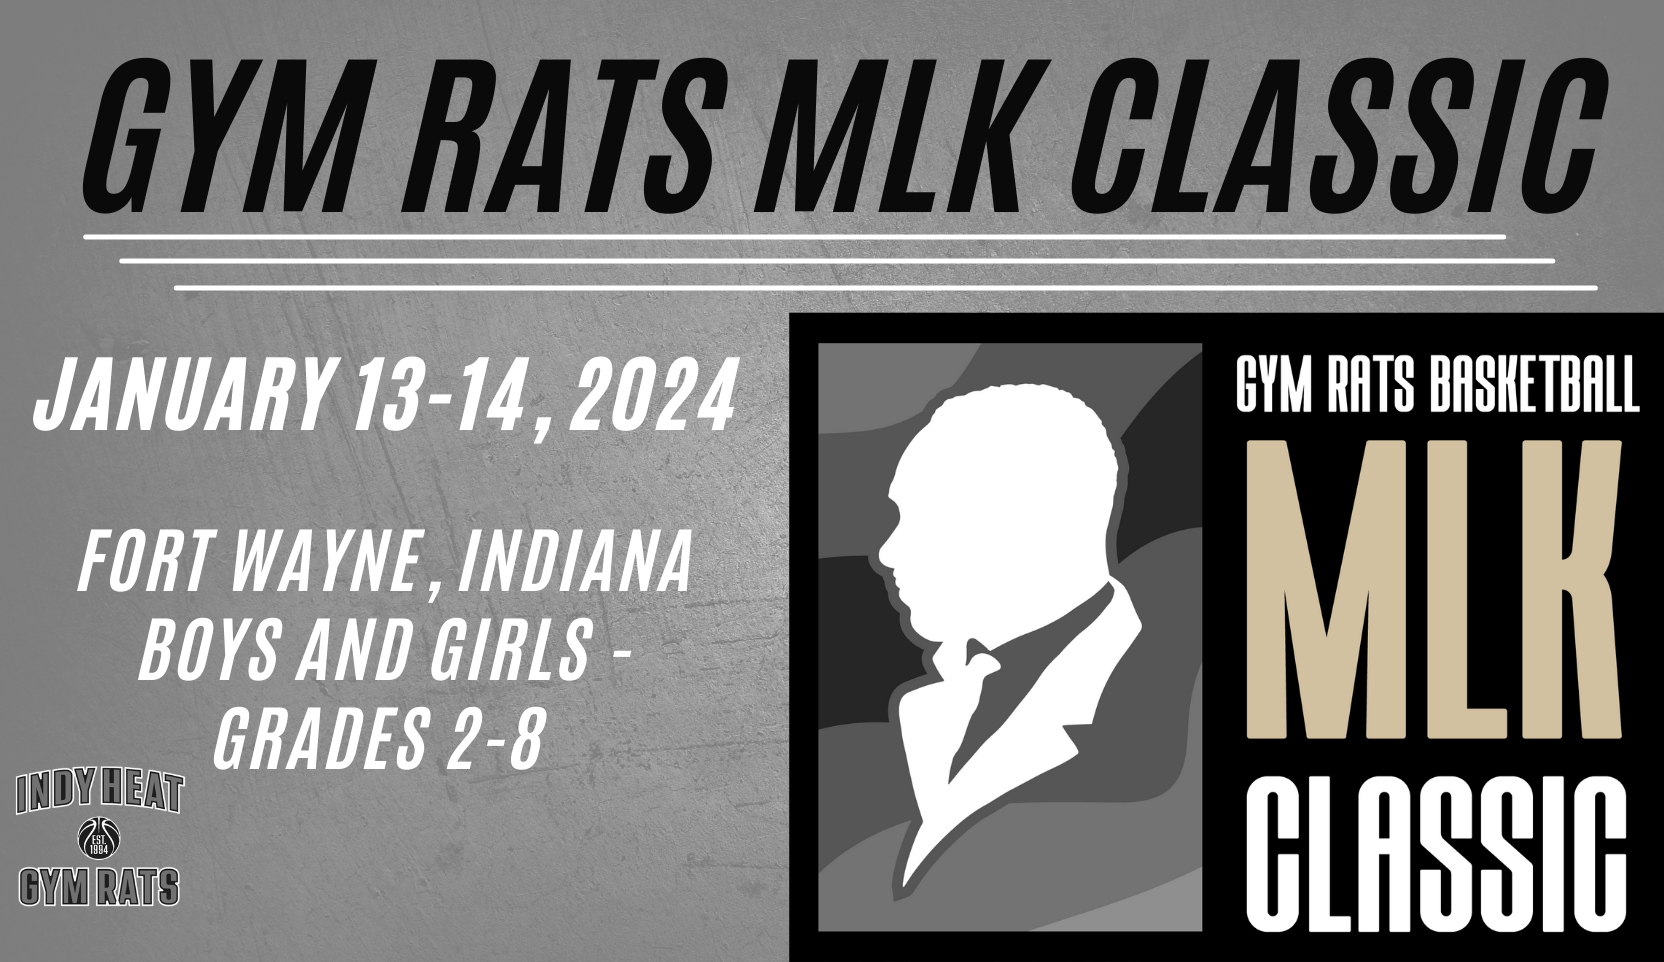 Gym Rats to Begin September 12th